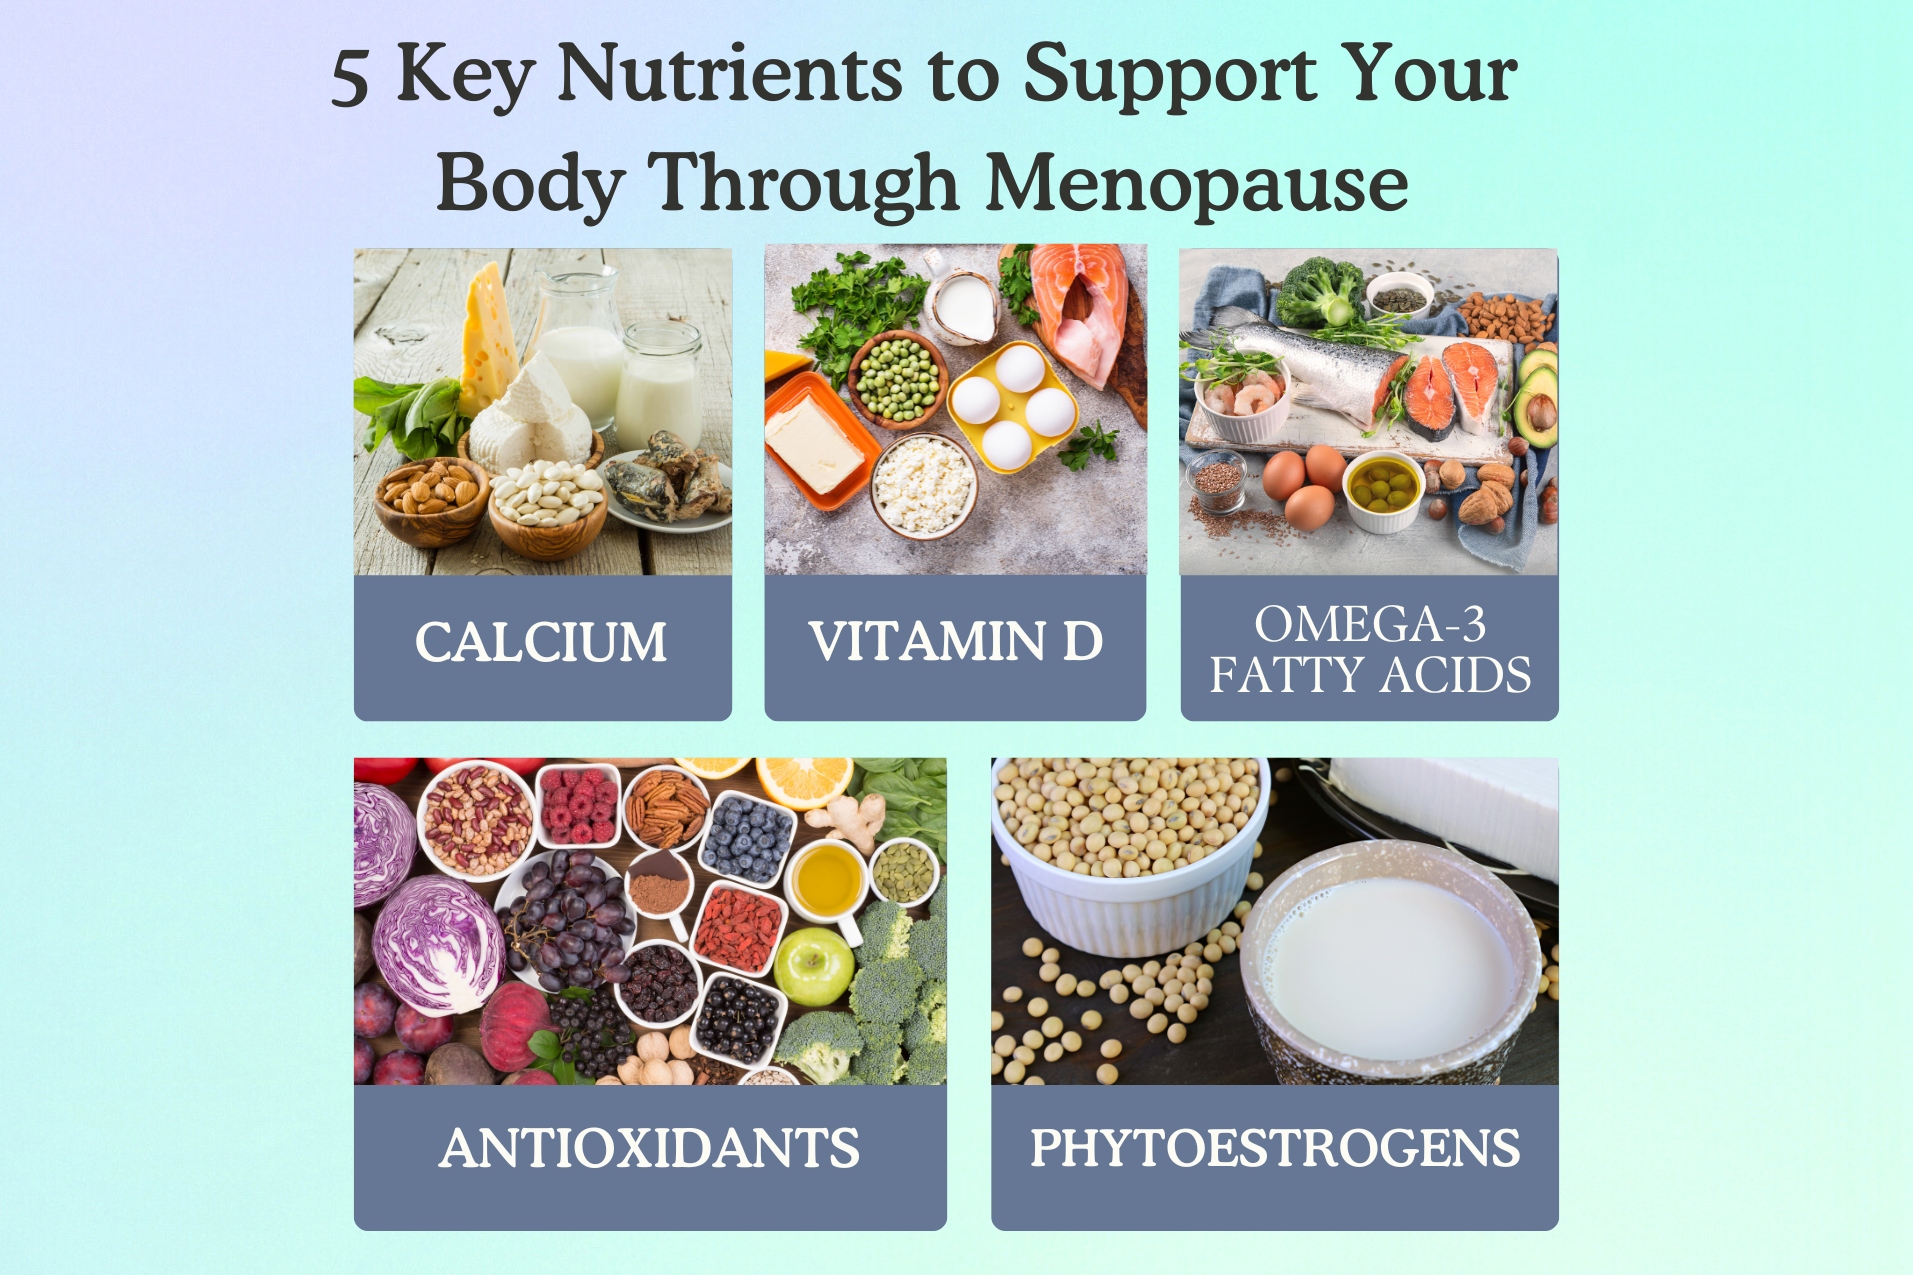 5 key nutrients to support your body through menopause with pictures